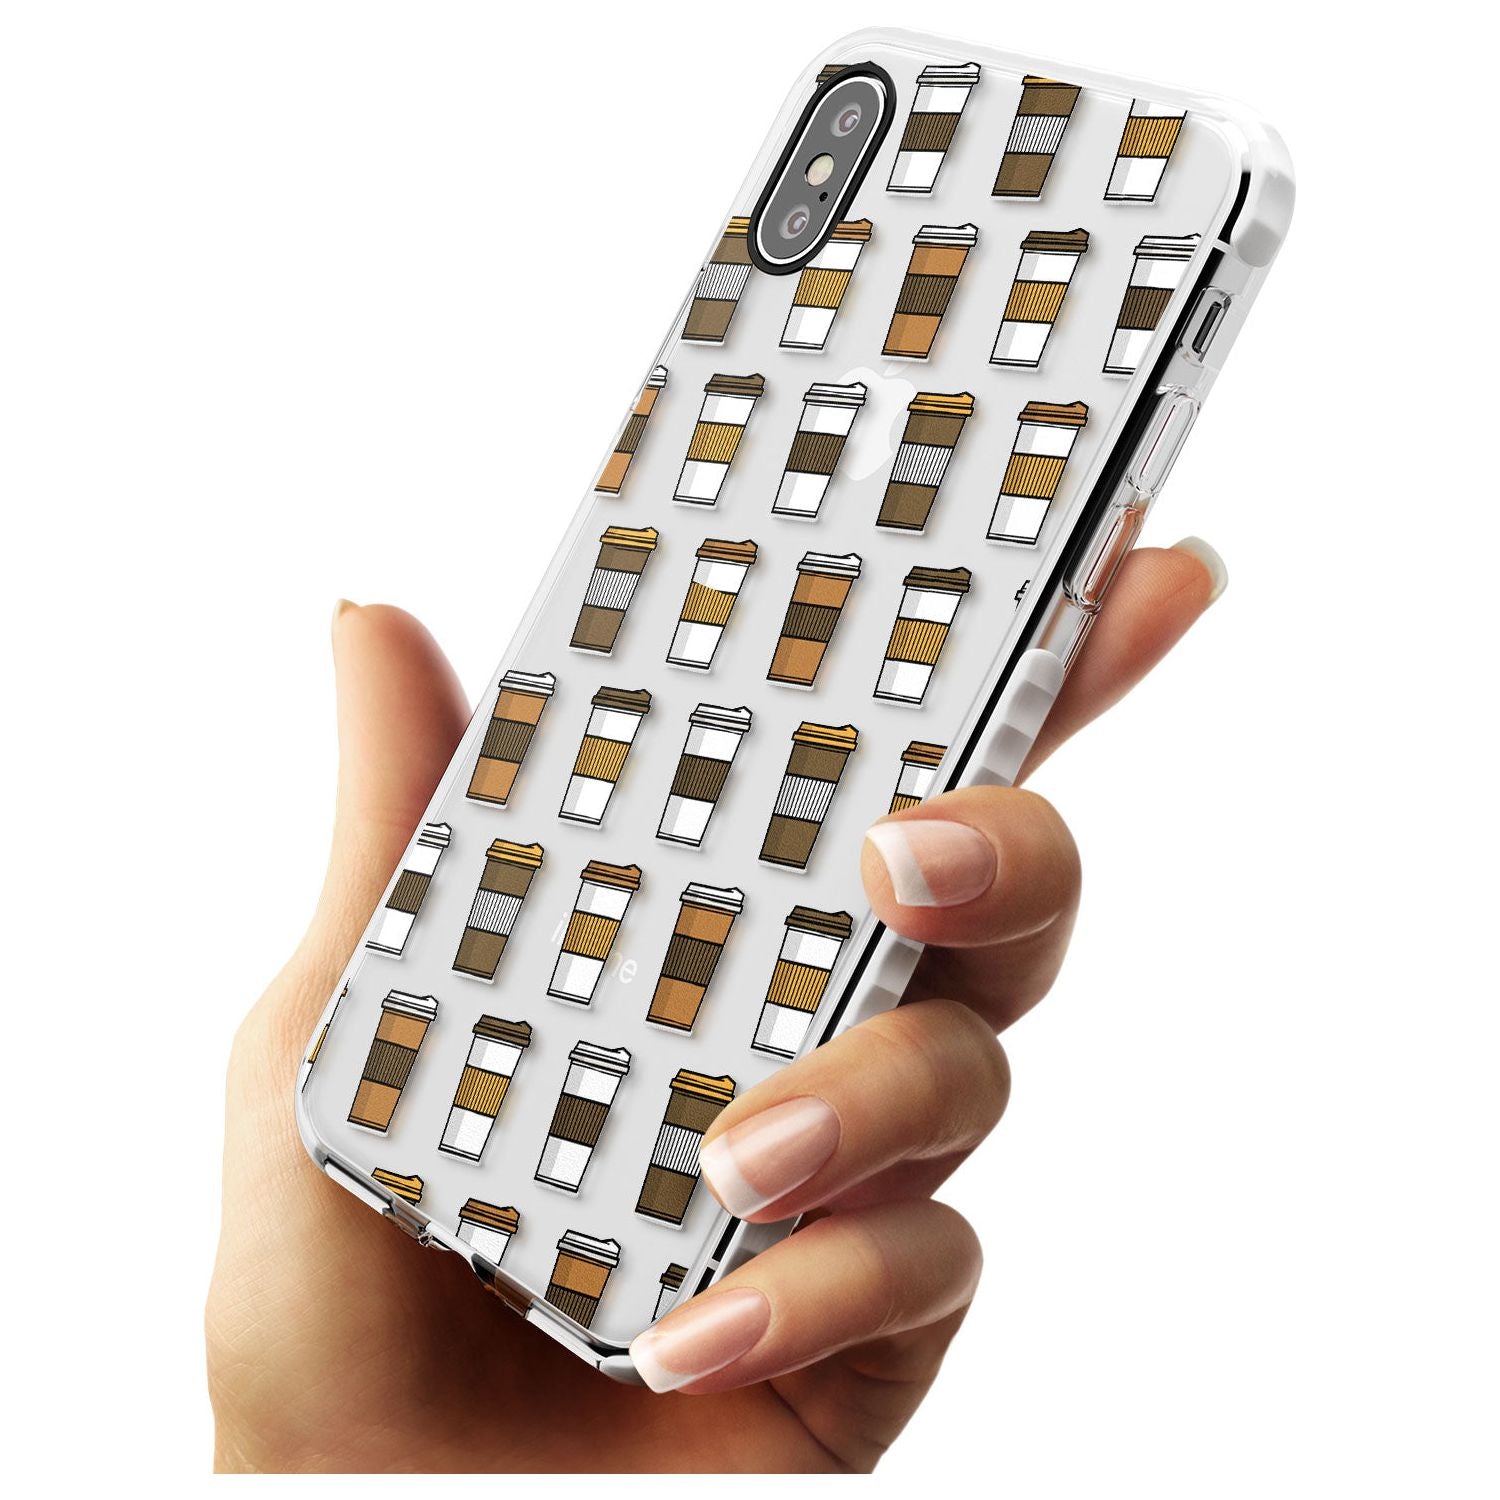 Coffee Cup Pattern Impact Phone Case for iPhone X XS Max XR